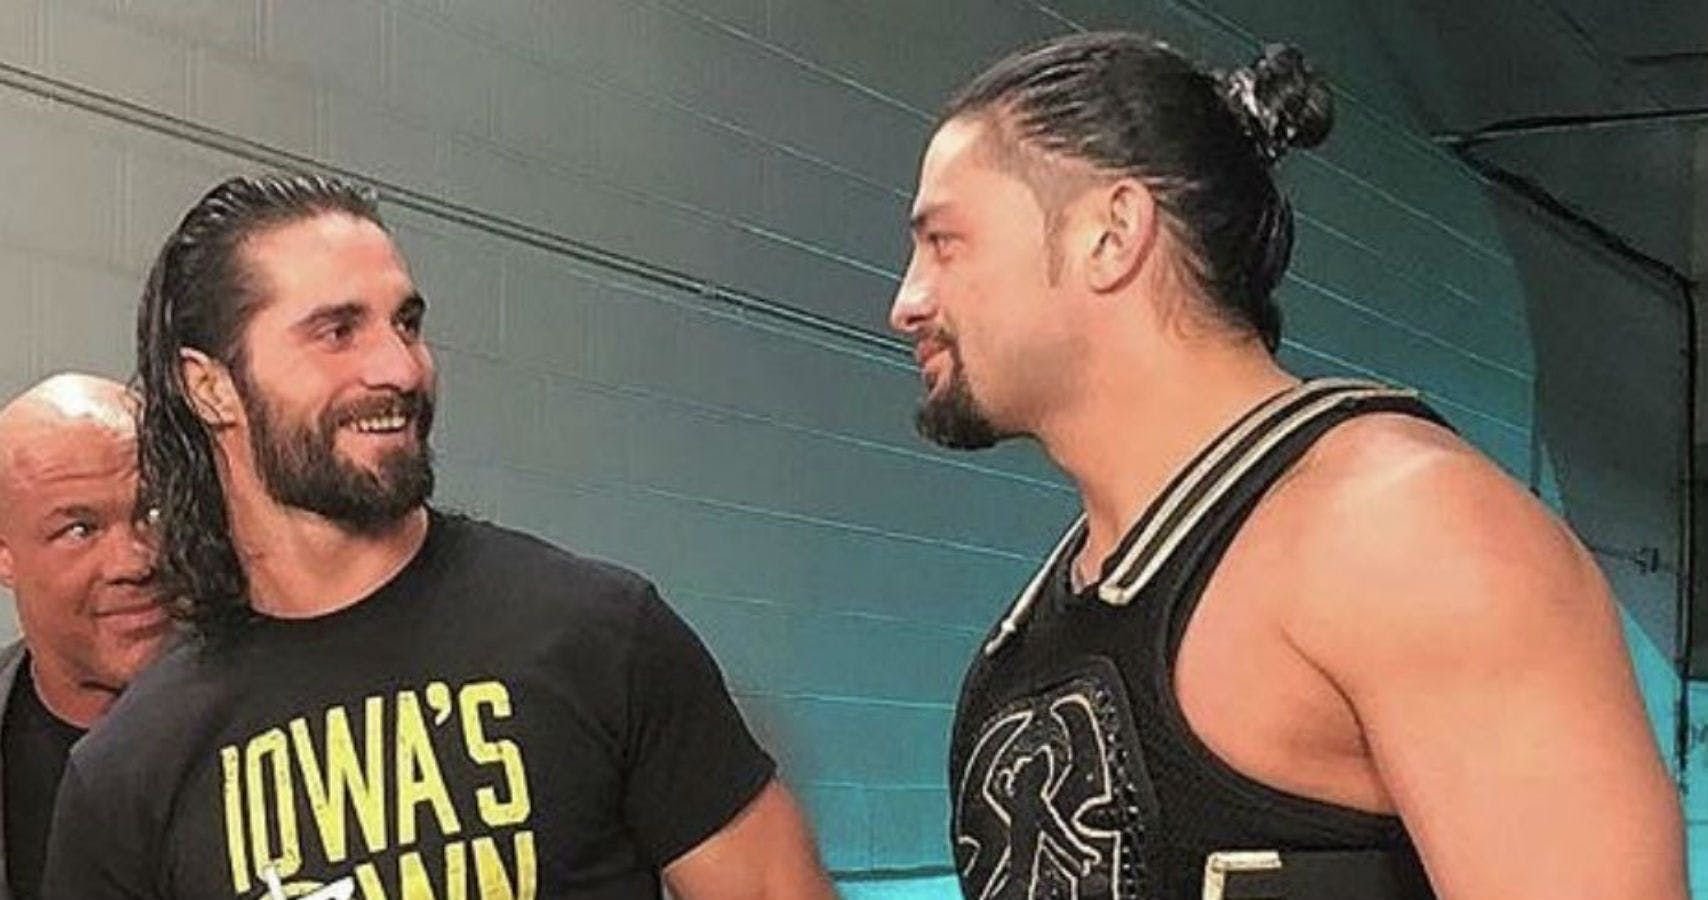 Seth Rollins Has A Warning For Roman Reigns The Usos